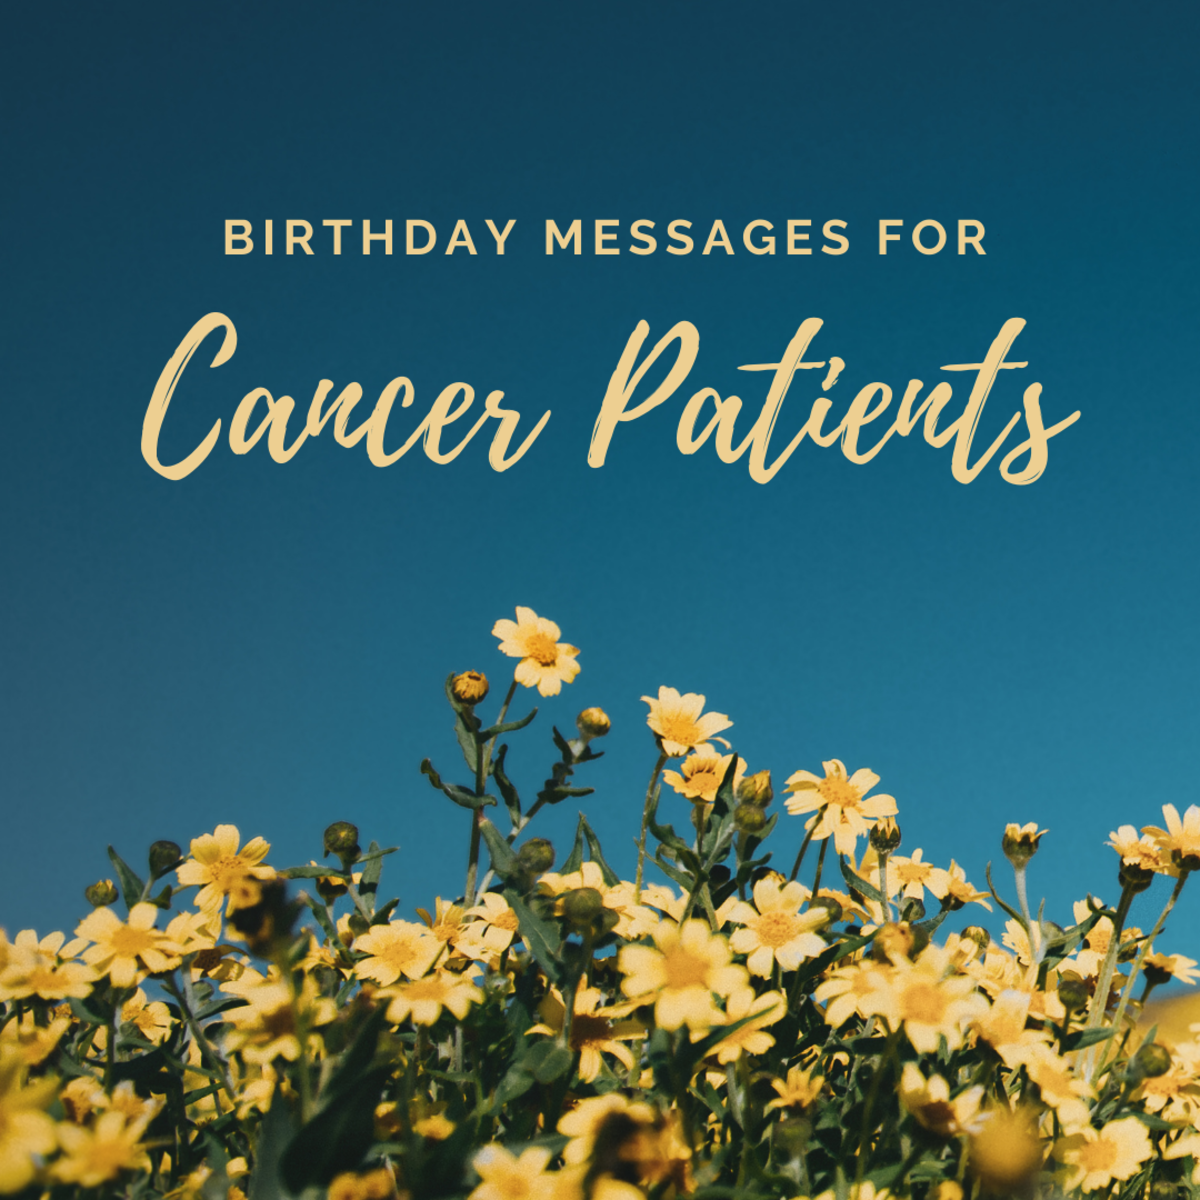 Finding the right words to wish happy birthday to a sick friend can be challenging. Here are some examples and ideas to help inspire you.